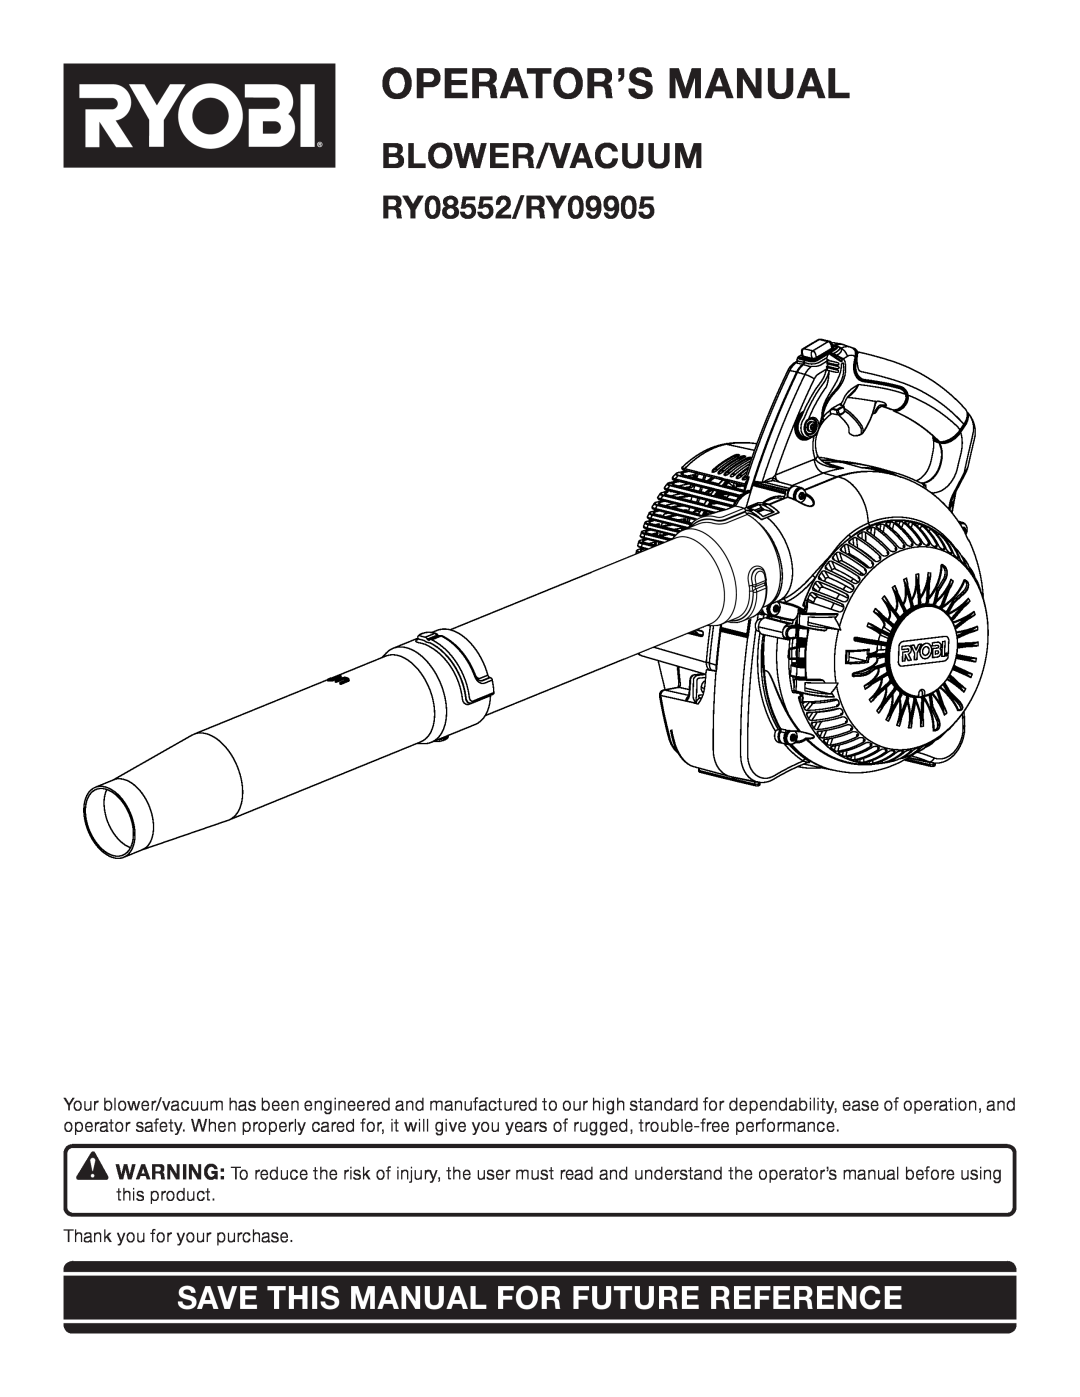 Ryobi manual Operator’S Manual, Blower/Vacuum, RY08552/RY09905, Save This Manual For Future Reference 